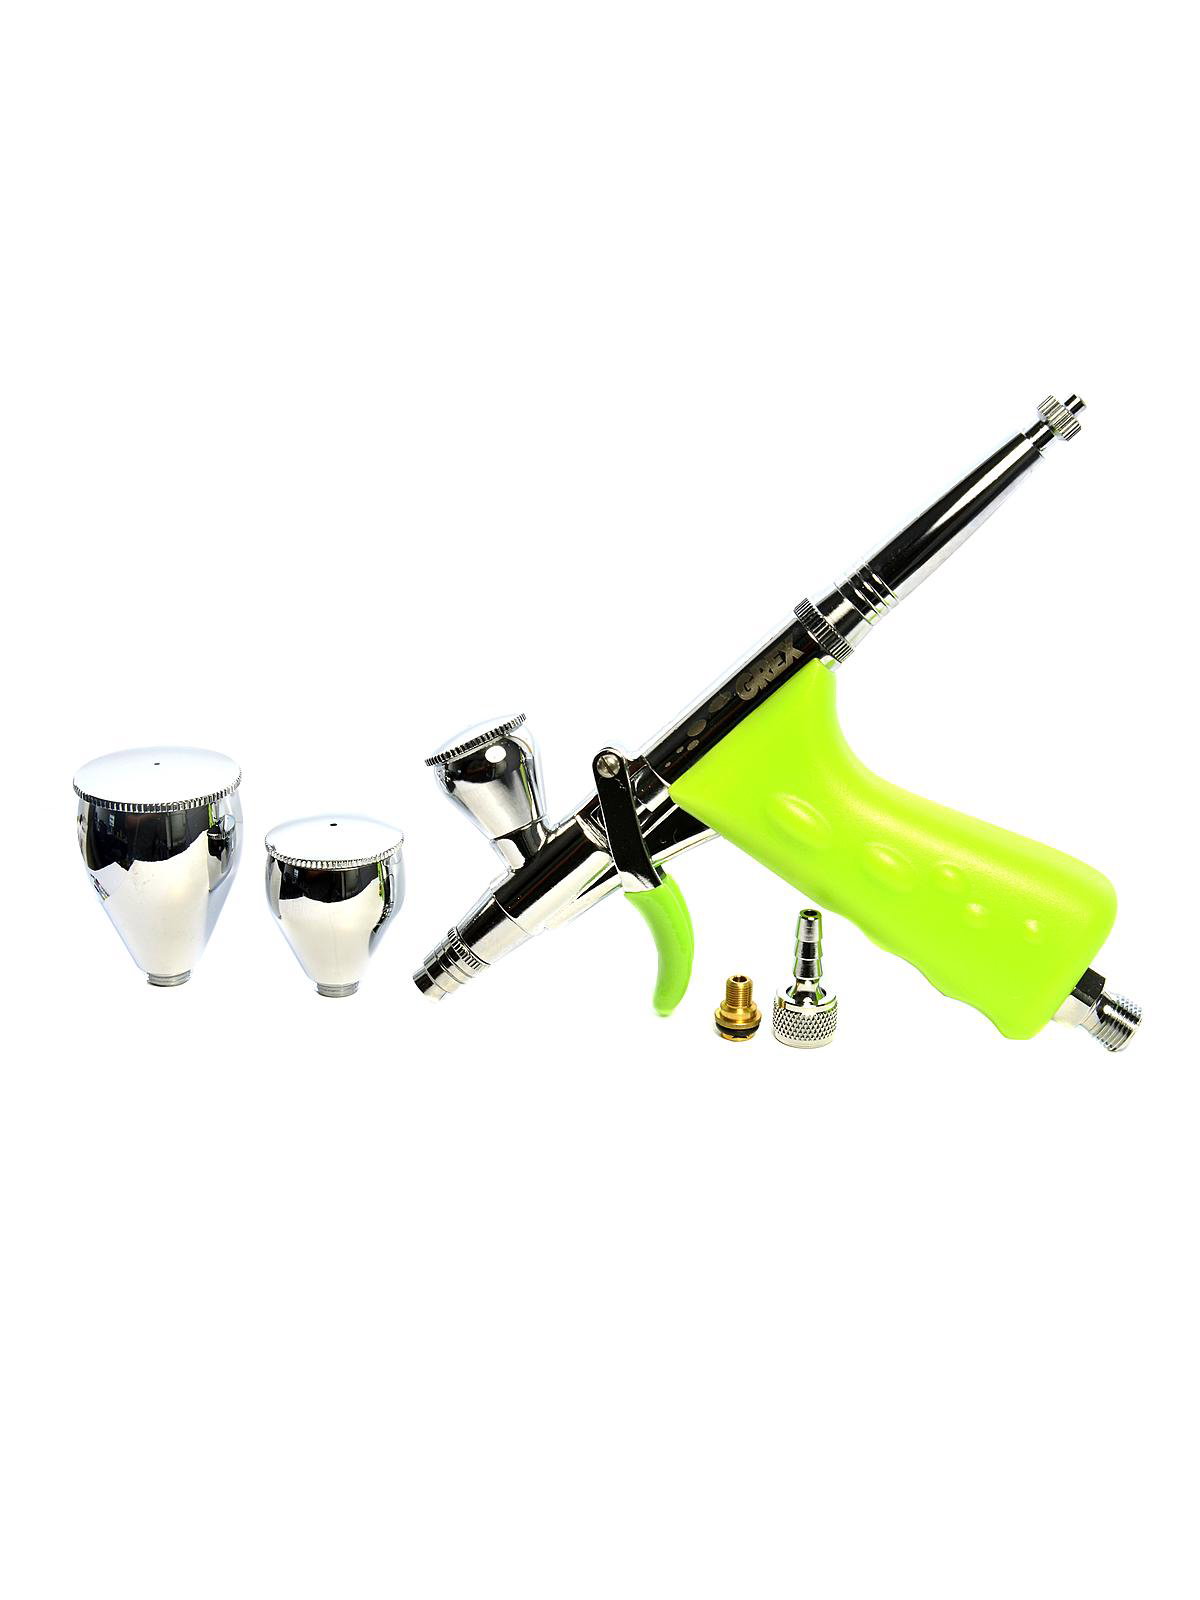 Grex Double Action Pistol Style Trigger Airbrush Top Gravity Feed